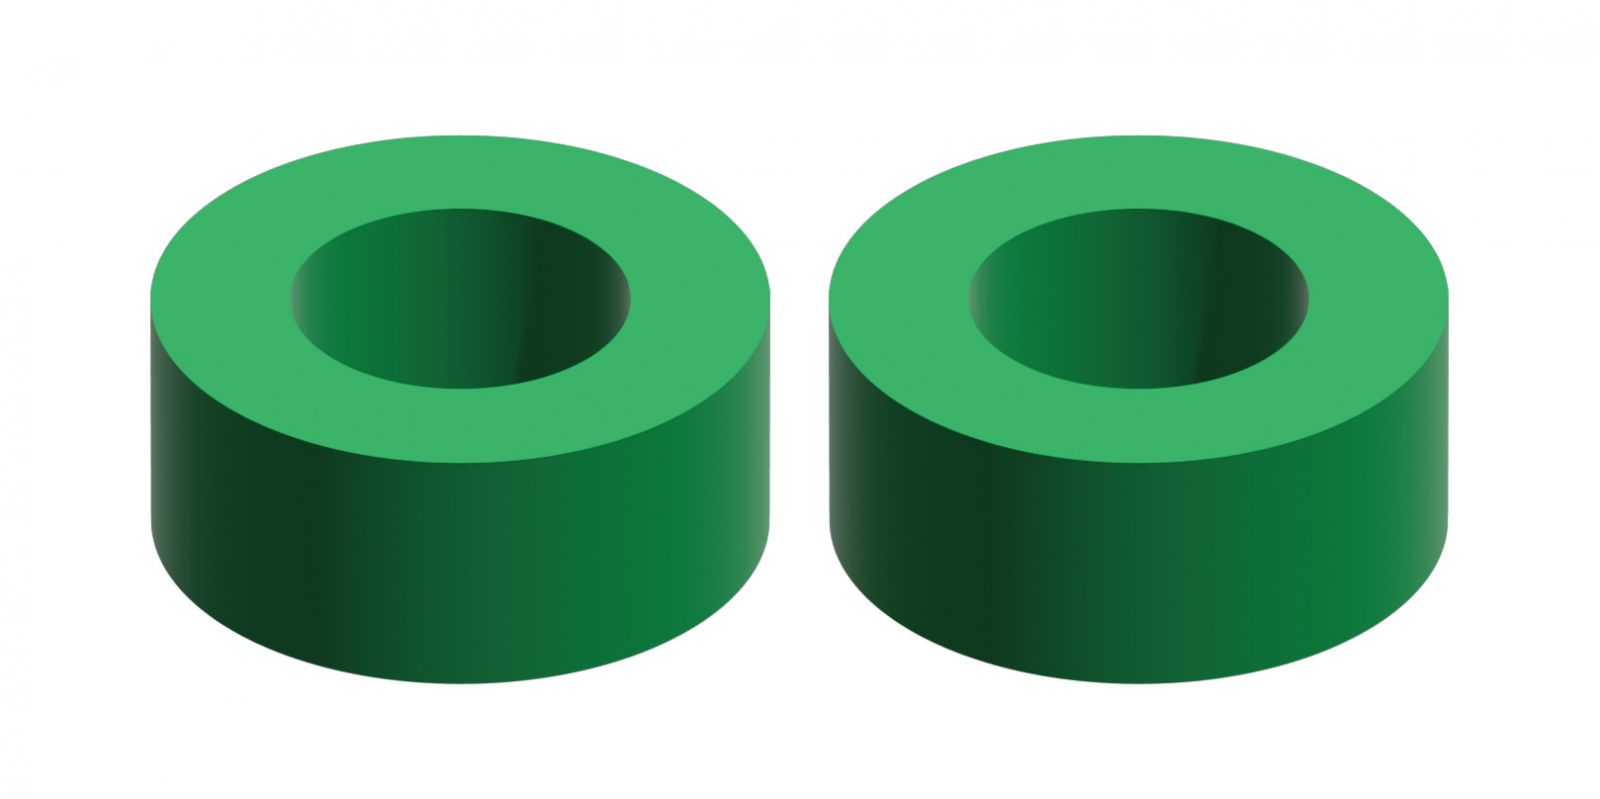 GOTREND Article-What does the color of the inductor ring mean? High conductivity ring